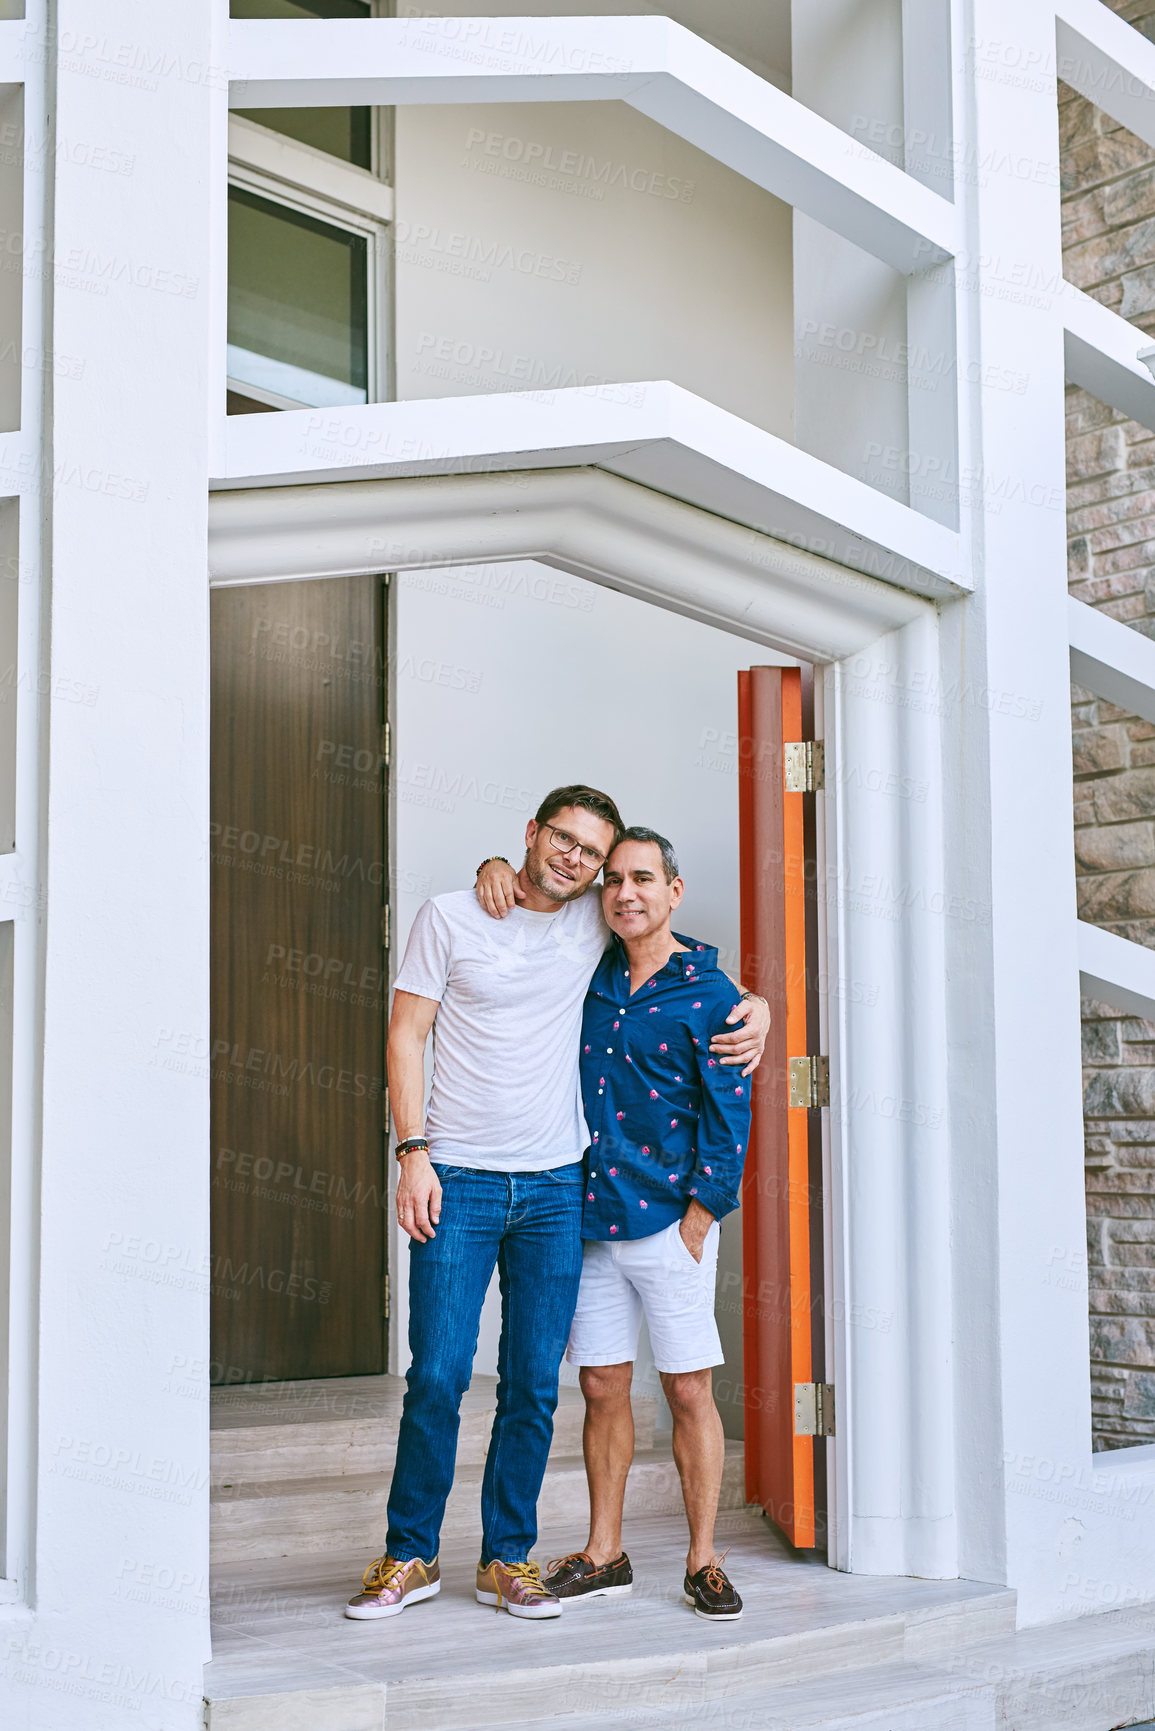 Buy stock photo Full length portrait of an affectionate mature couple standing in the doorway to their home